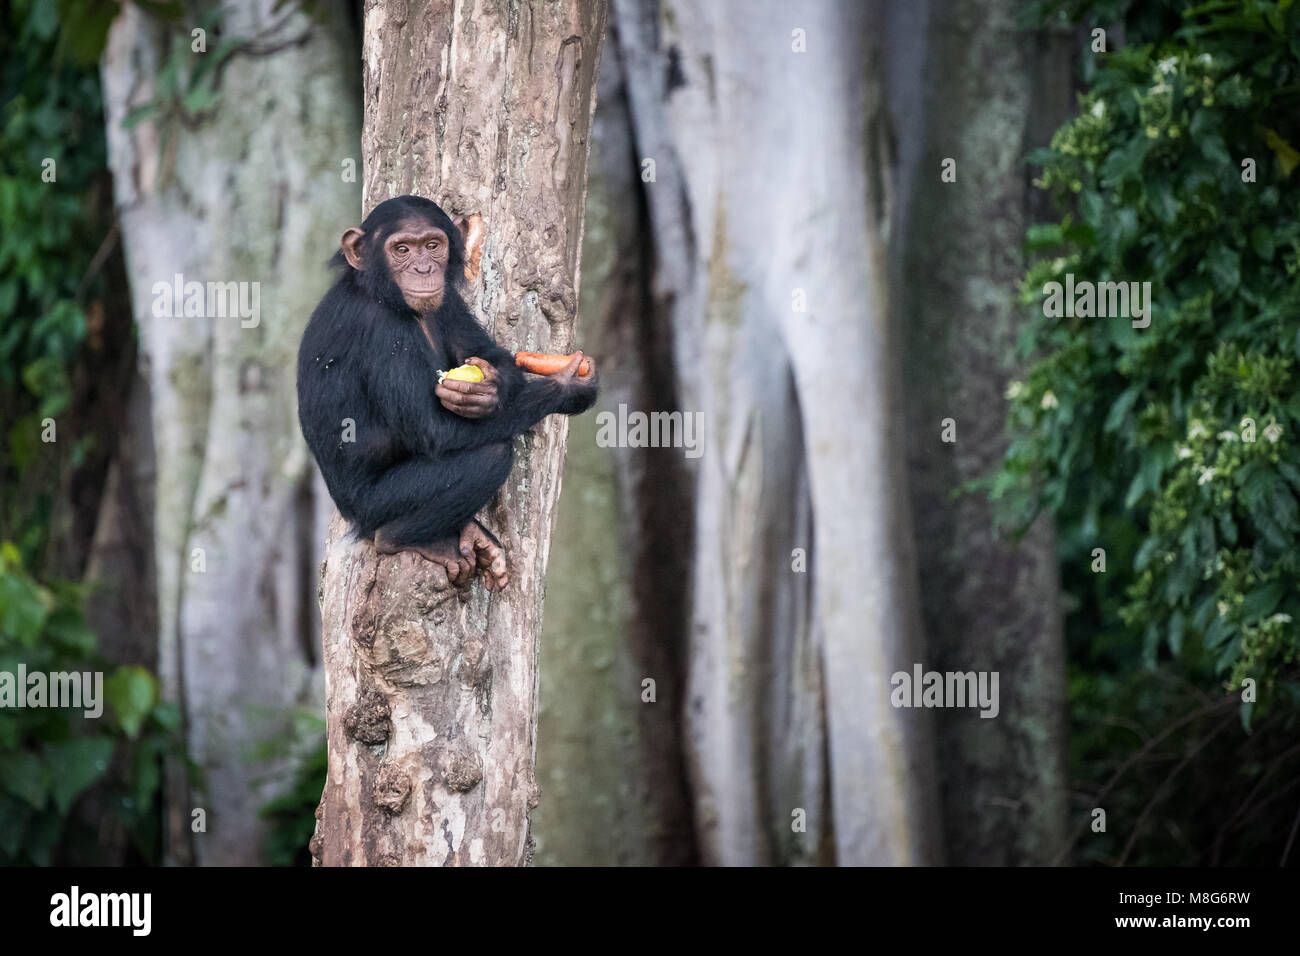 Young chimpanzee sits on a tree after picking up food in the Ngamba Island Chimpanzee Sanctuary in Uganda Stock Photo